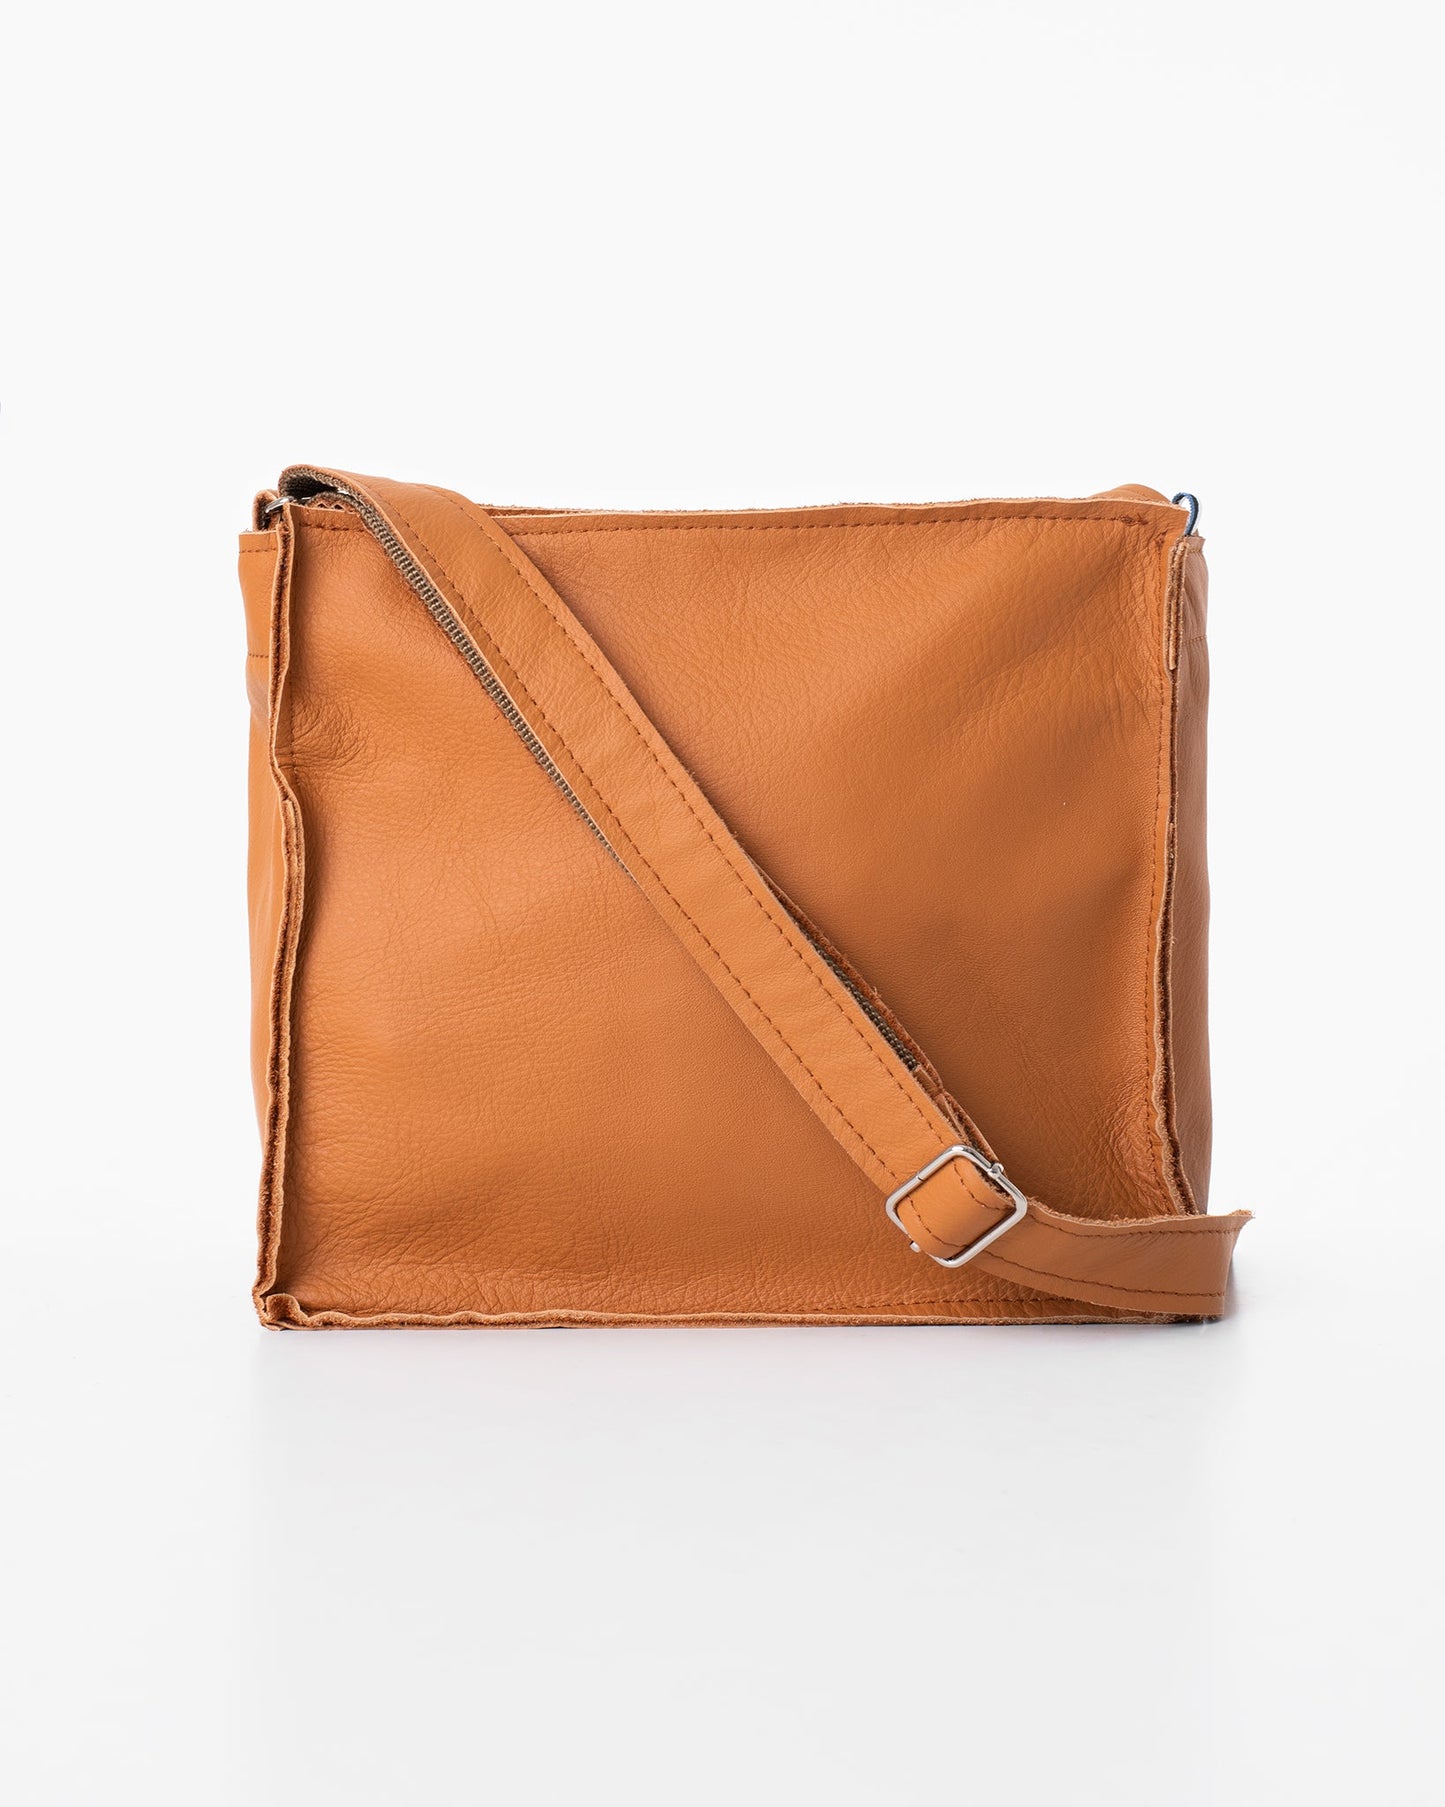 Handmade leather Folk 1 shoulder bag - Calvados from Trendbag, Estonia. Crafted from high-quality furniture industry leftovers, each bag is unique. Durable and eco-friendly.